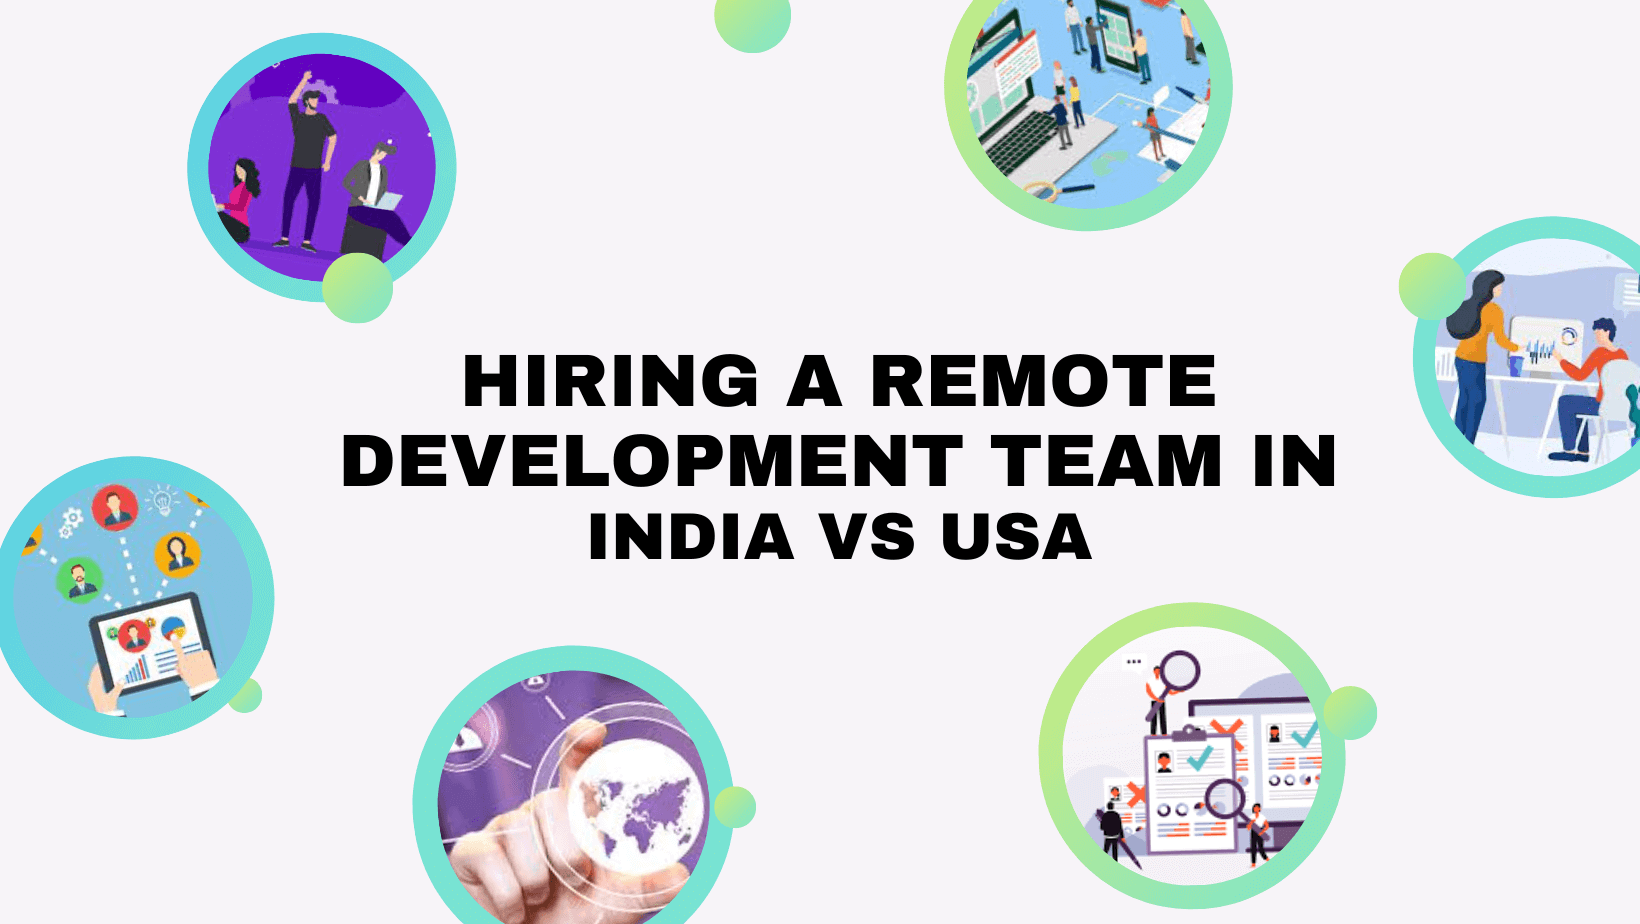 Hiring remote developers in India Vs USA: Advantages and Challenges